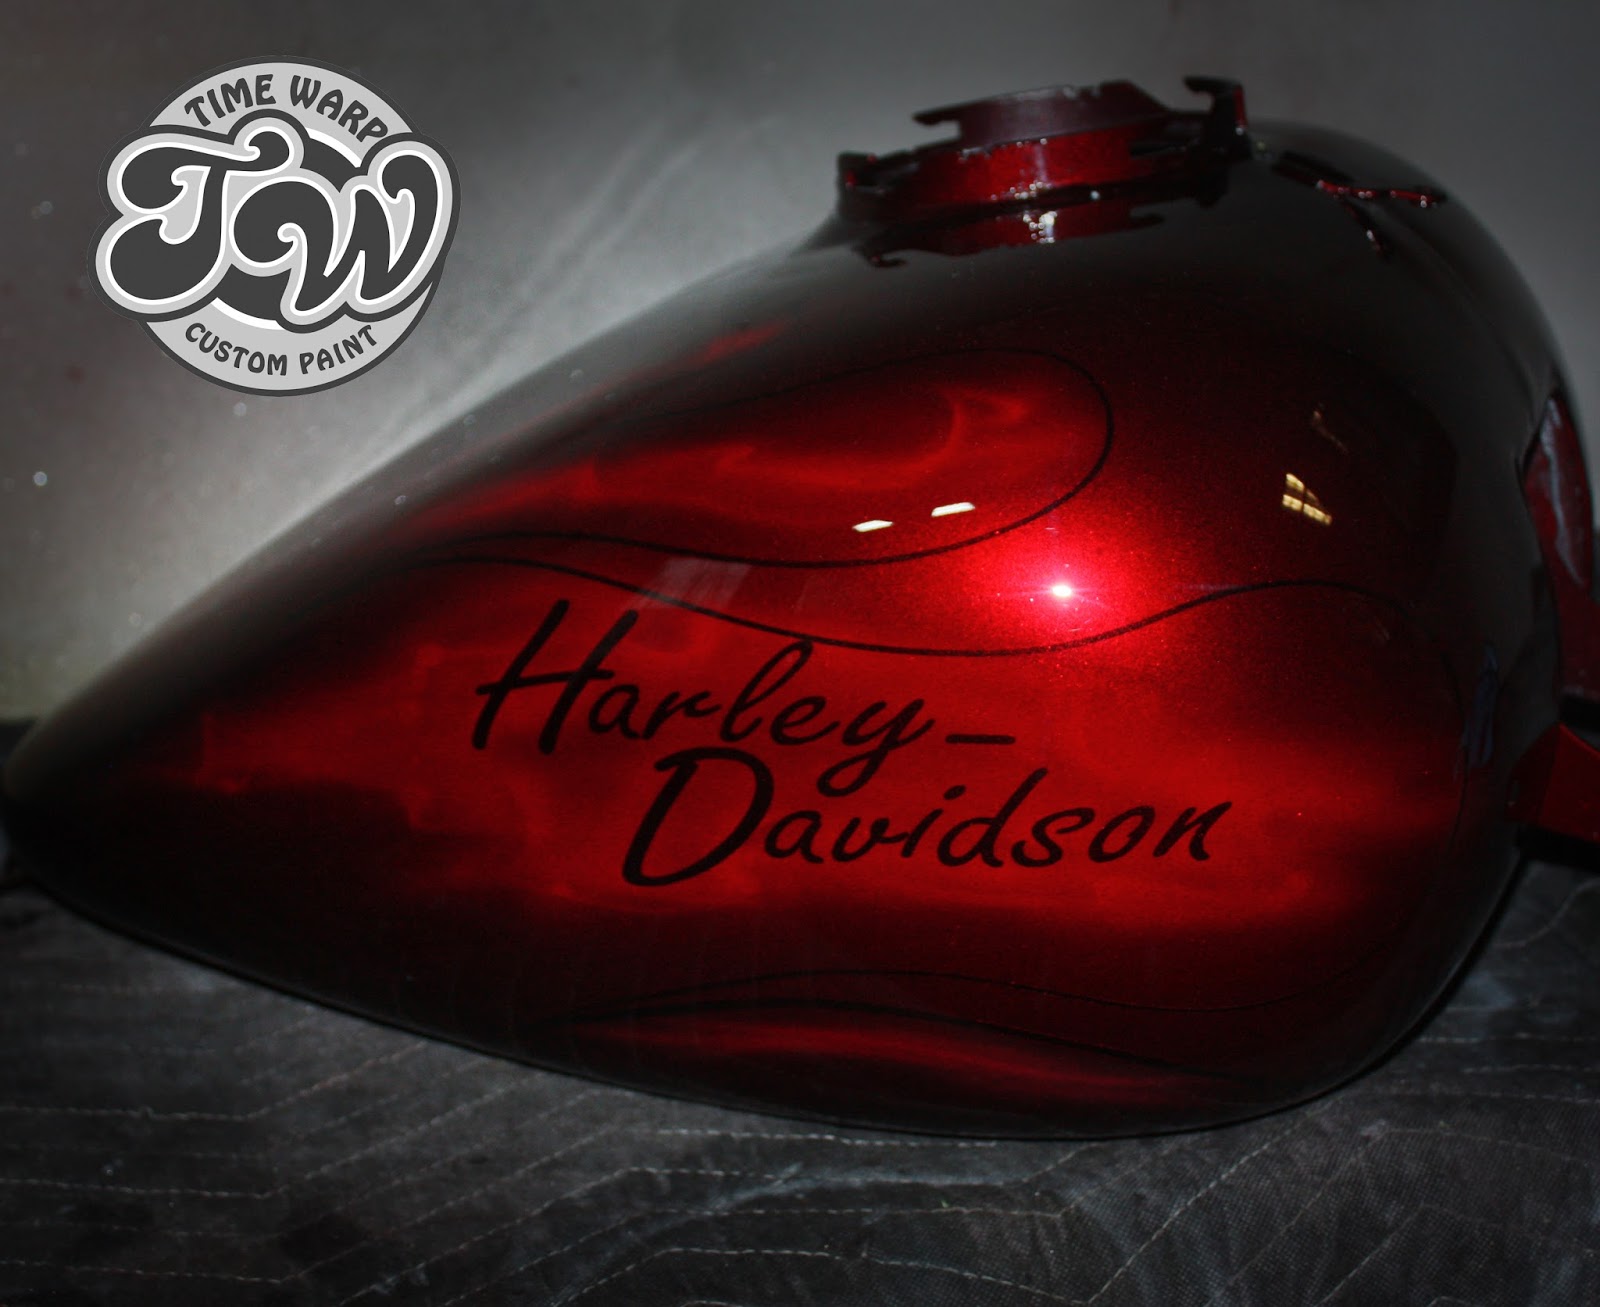 Online Motorcycle Paint Shop: Candy Brandywine with eagles and classic  flame pinstripe